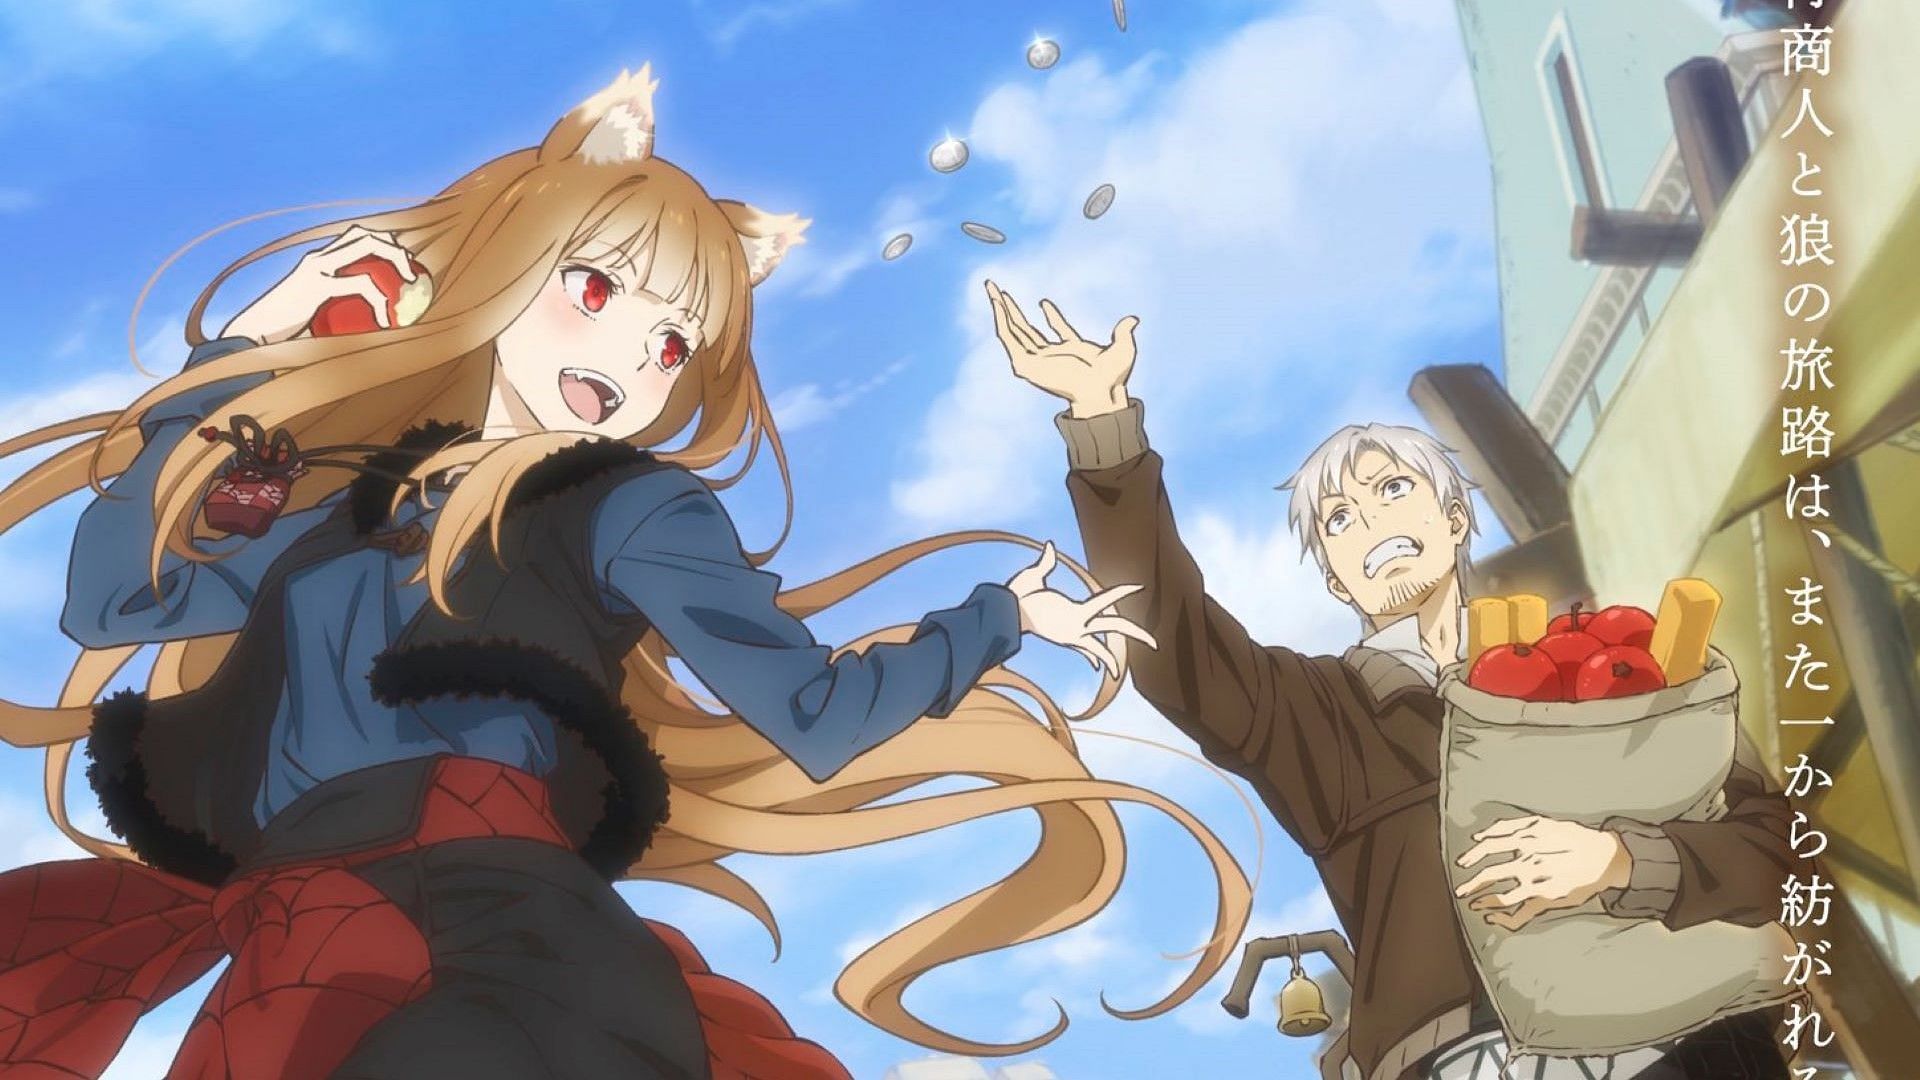 Spice and Wolf: Merchant Meets the Wise Wolf complete release schedule (Image via Studio Passione)